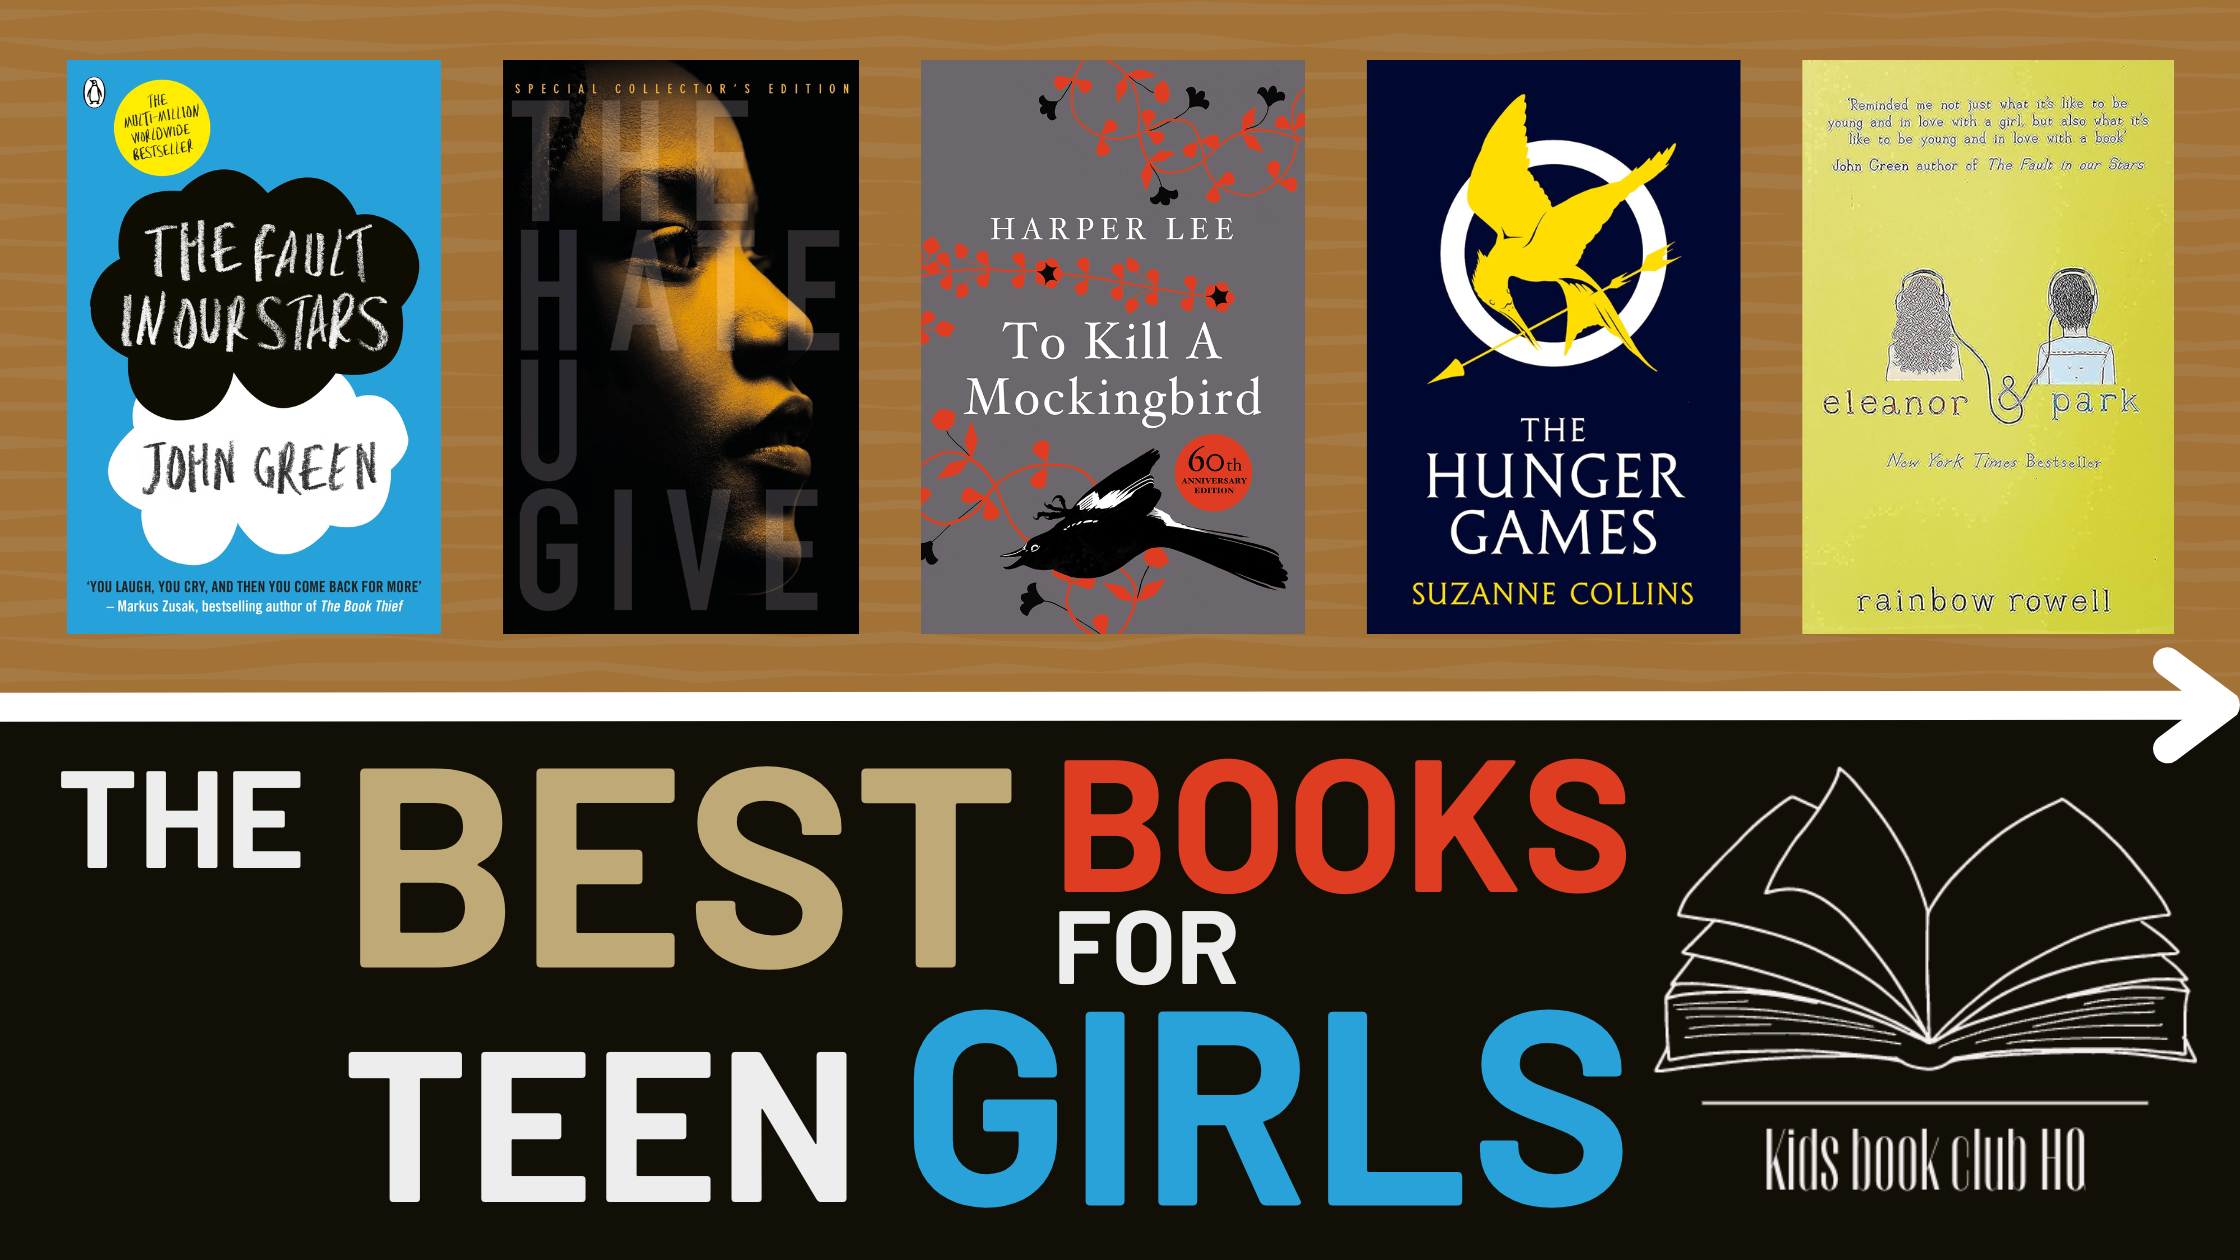 teen girls who love reading must check out these books.